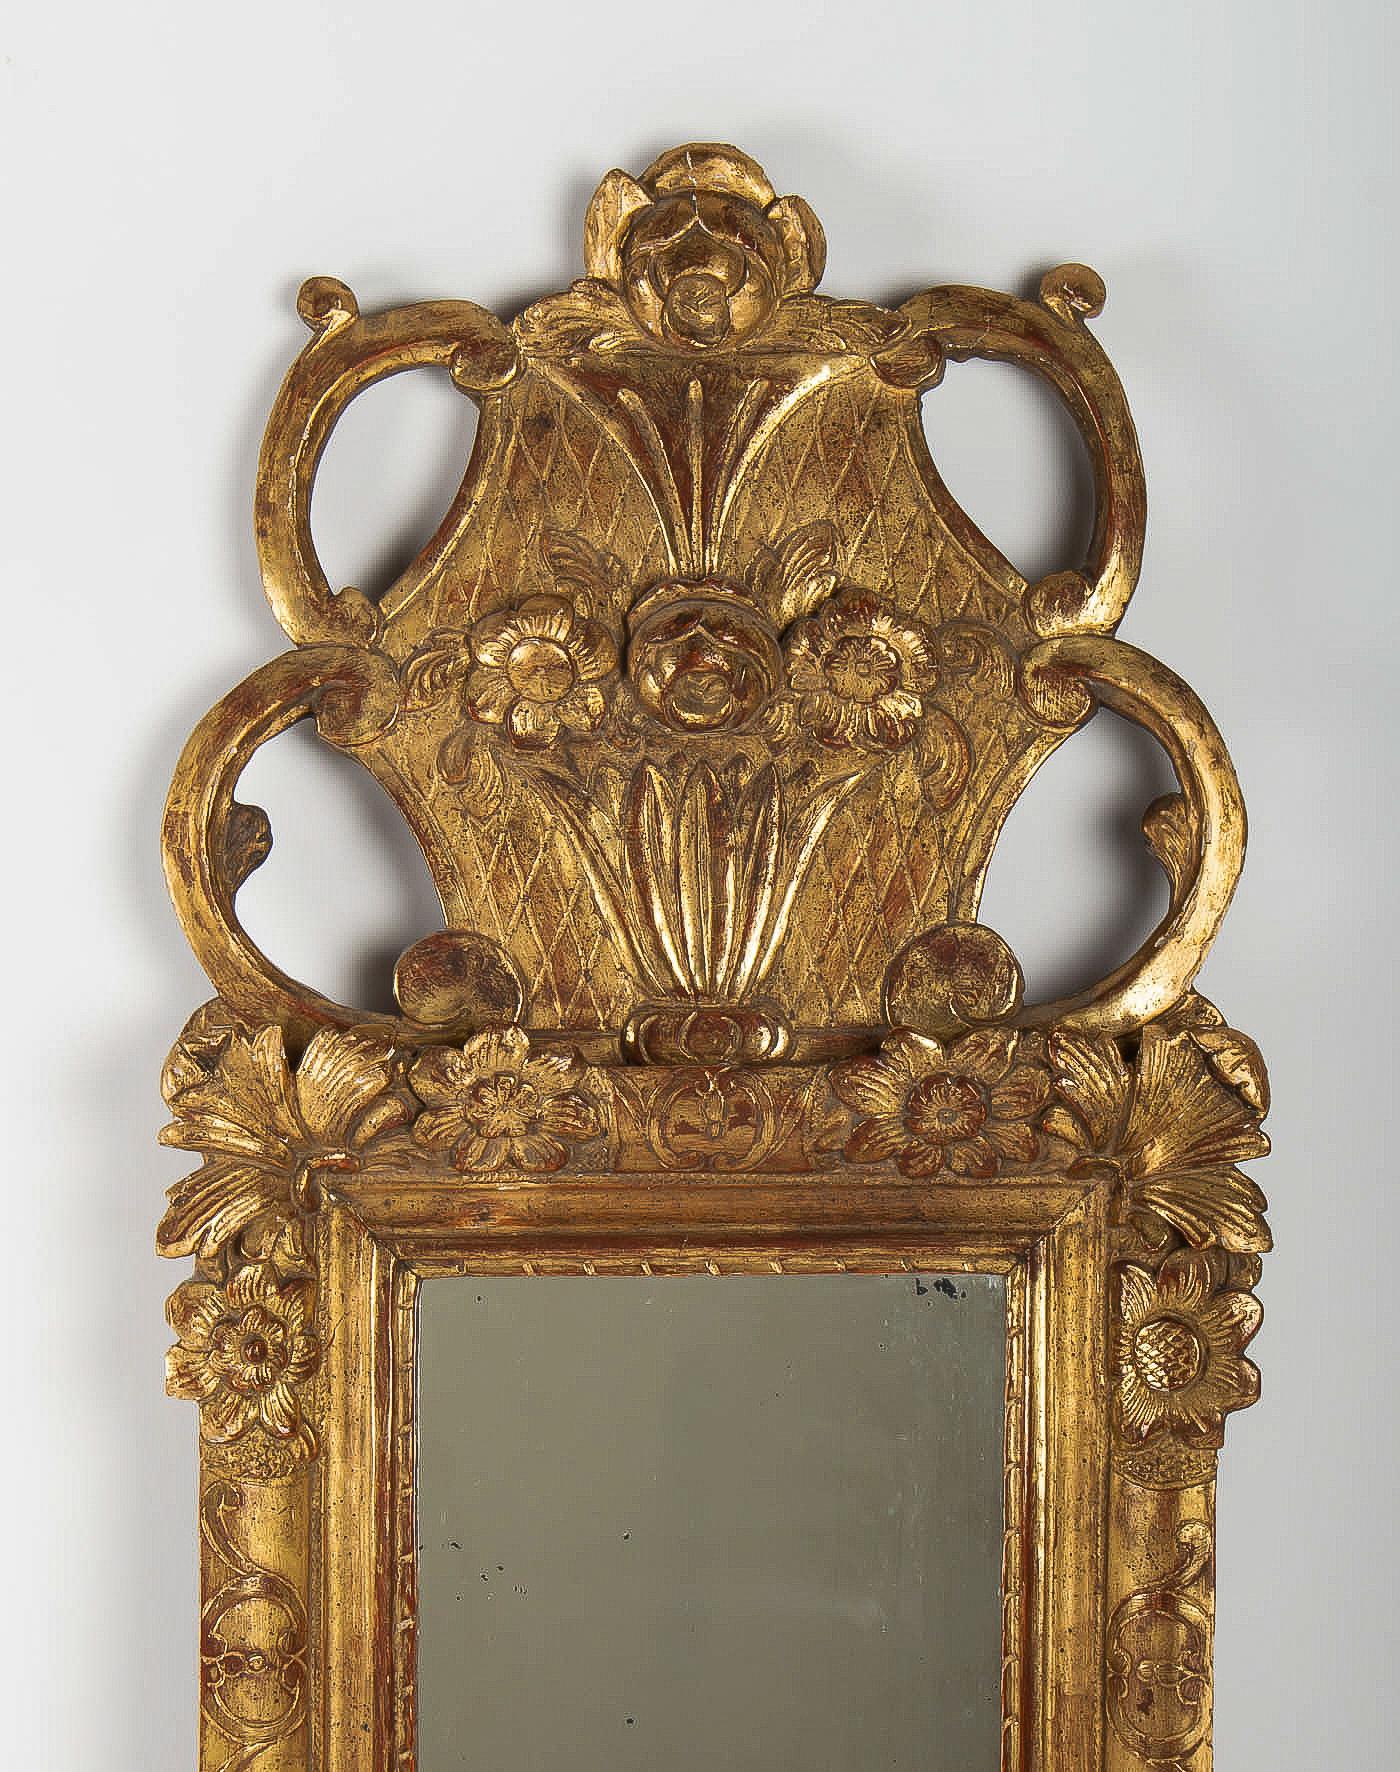 Régence French Regence Provencal Period, Small Giltwood Top-Front Mirror, circa 1720